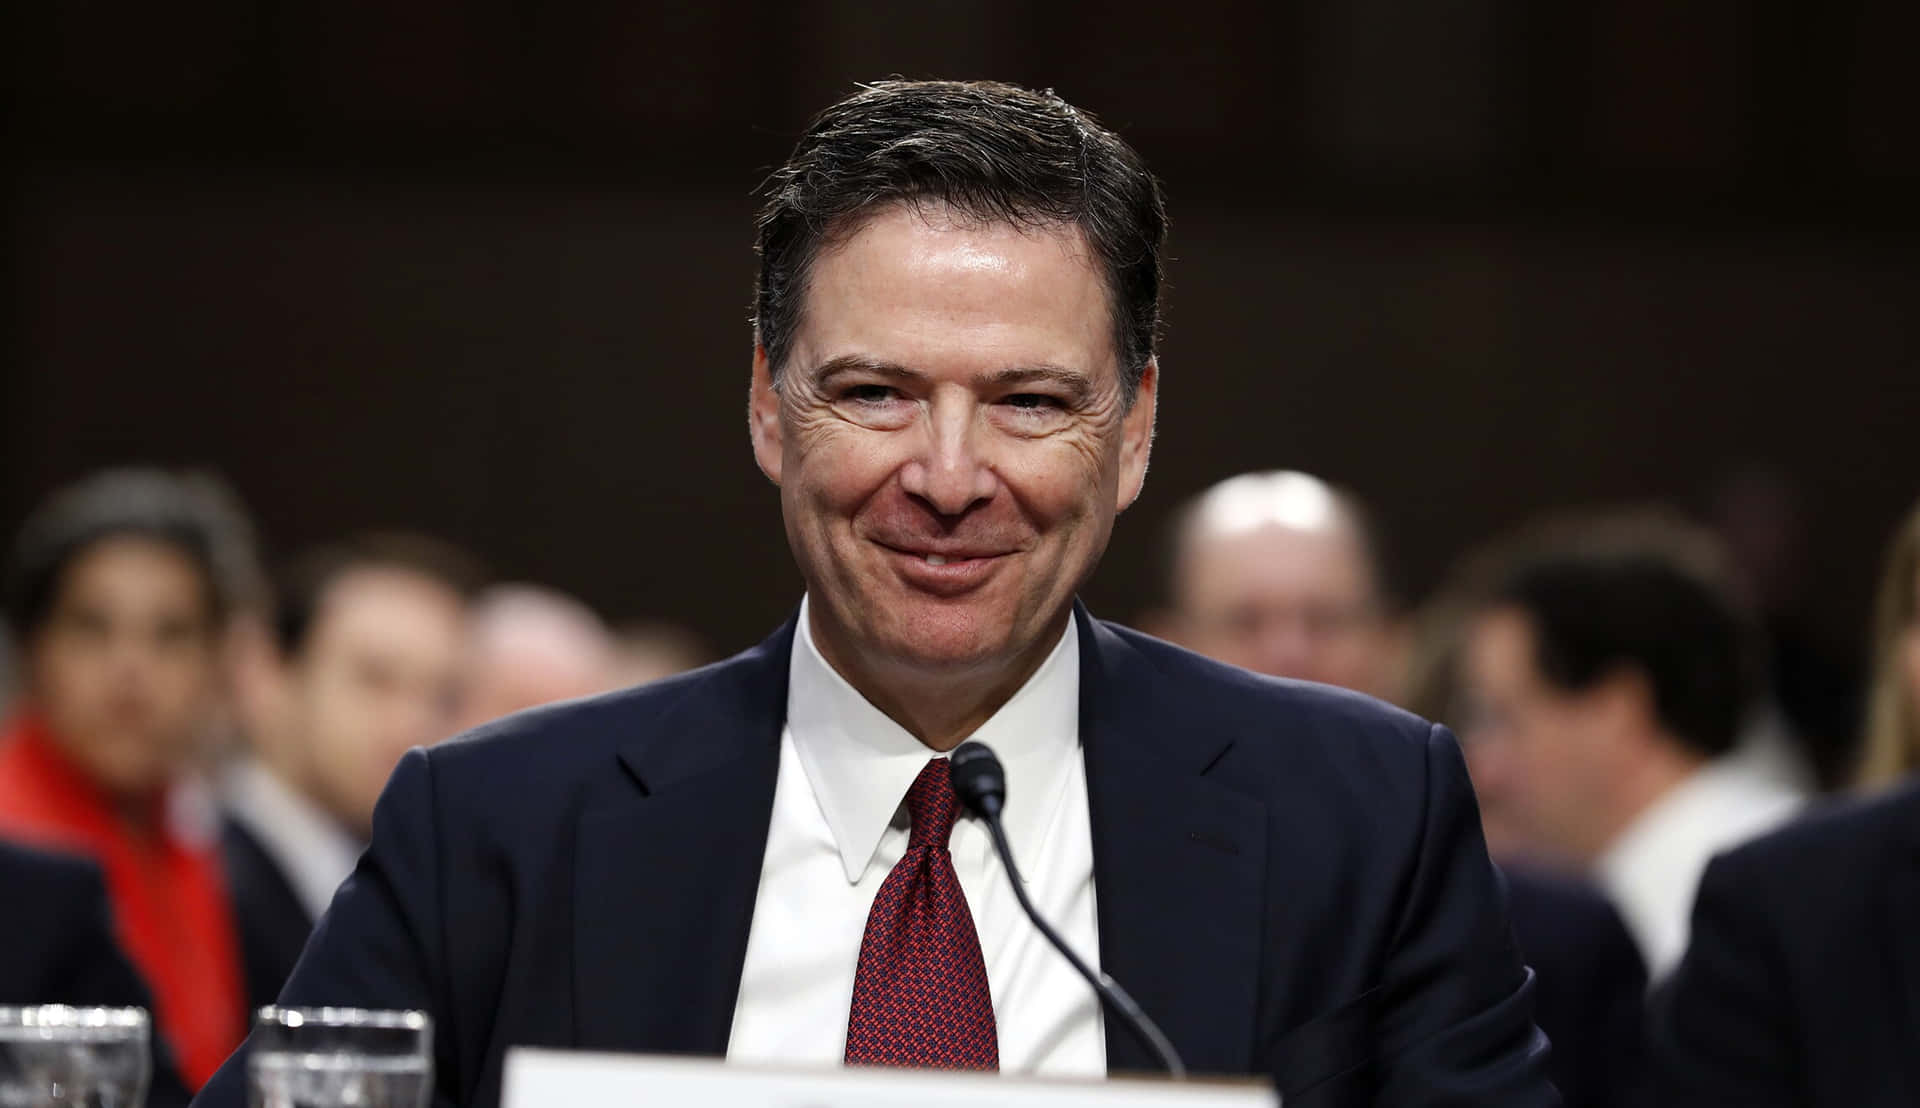 James Comey Smiling During Hearing.jpg Wallpaper